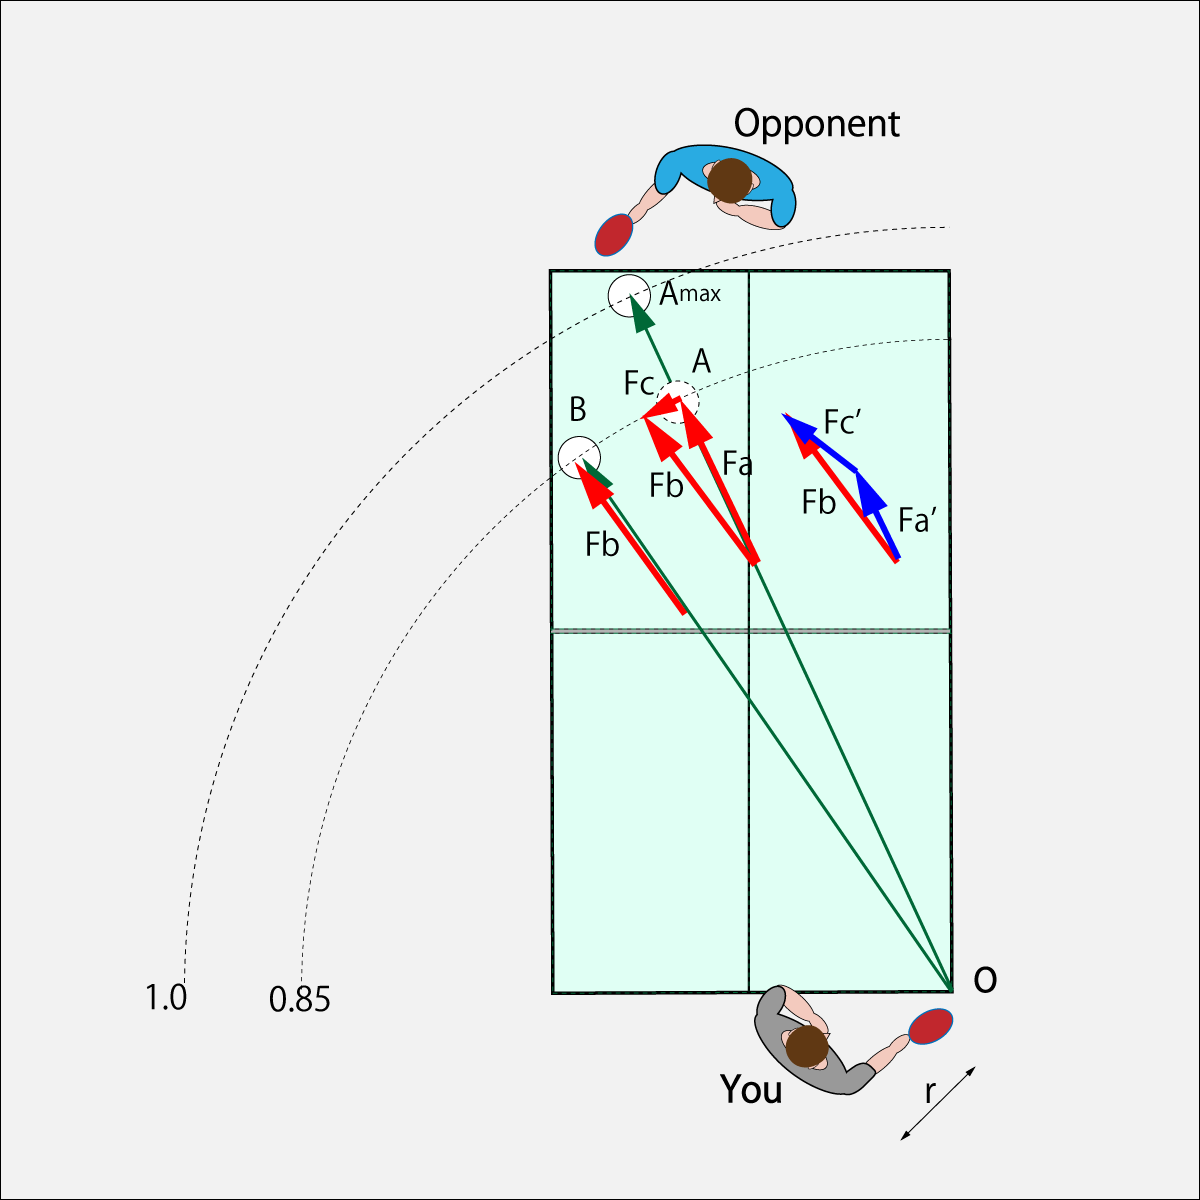 Return Control to Opponent's Fore side